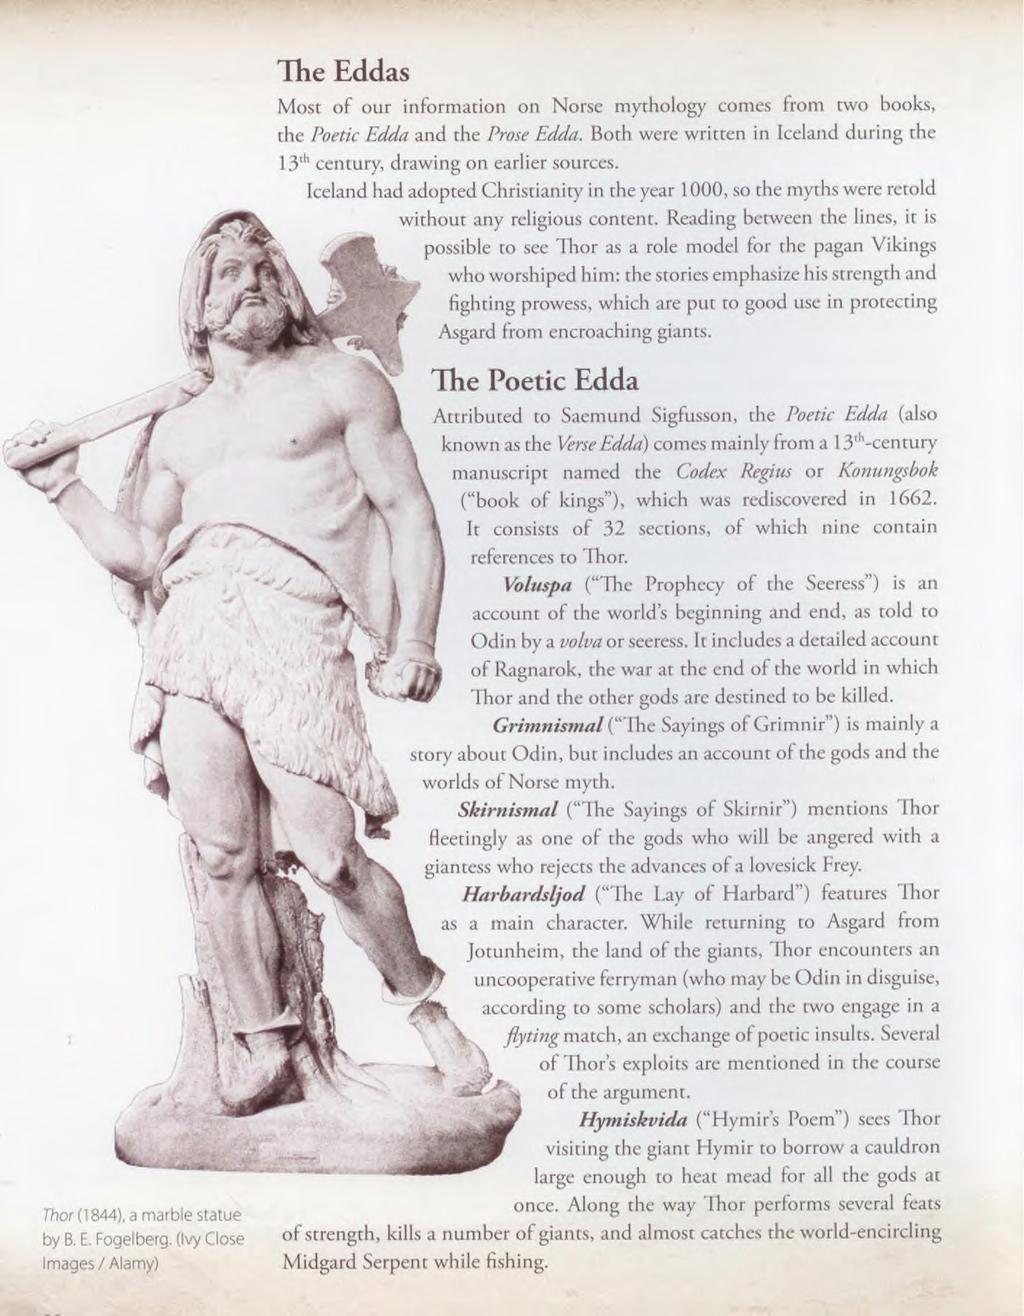 Thor (1844), a marble statue by B. E. Fogelberg. (Ivy Close Images / Alamy) The Eddas Most of our information on Norse mythology comes from two books, the Poetic Edda and the Prose Edda.